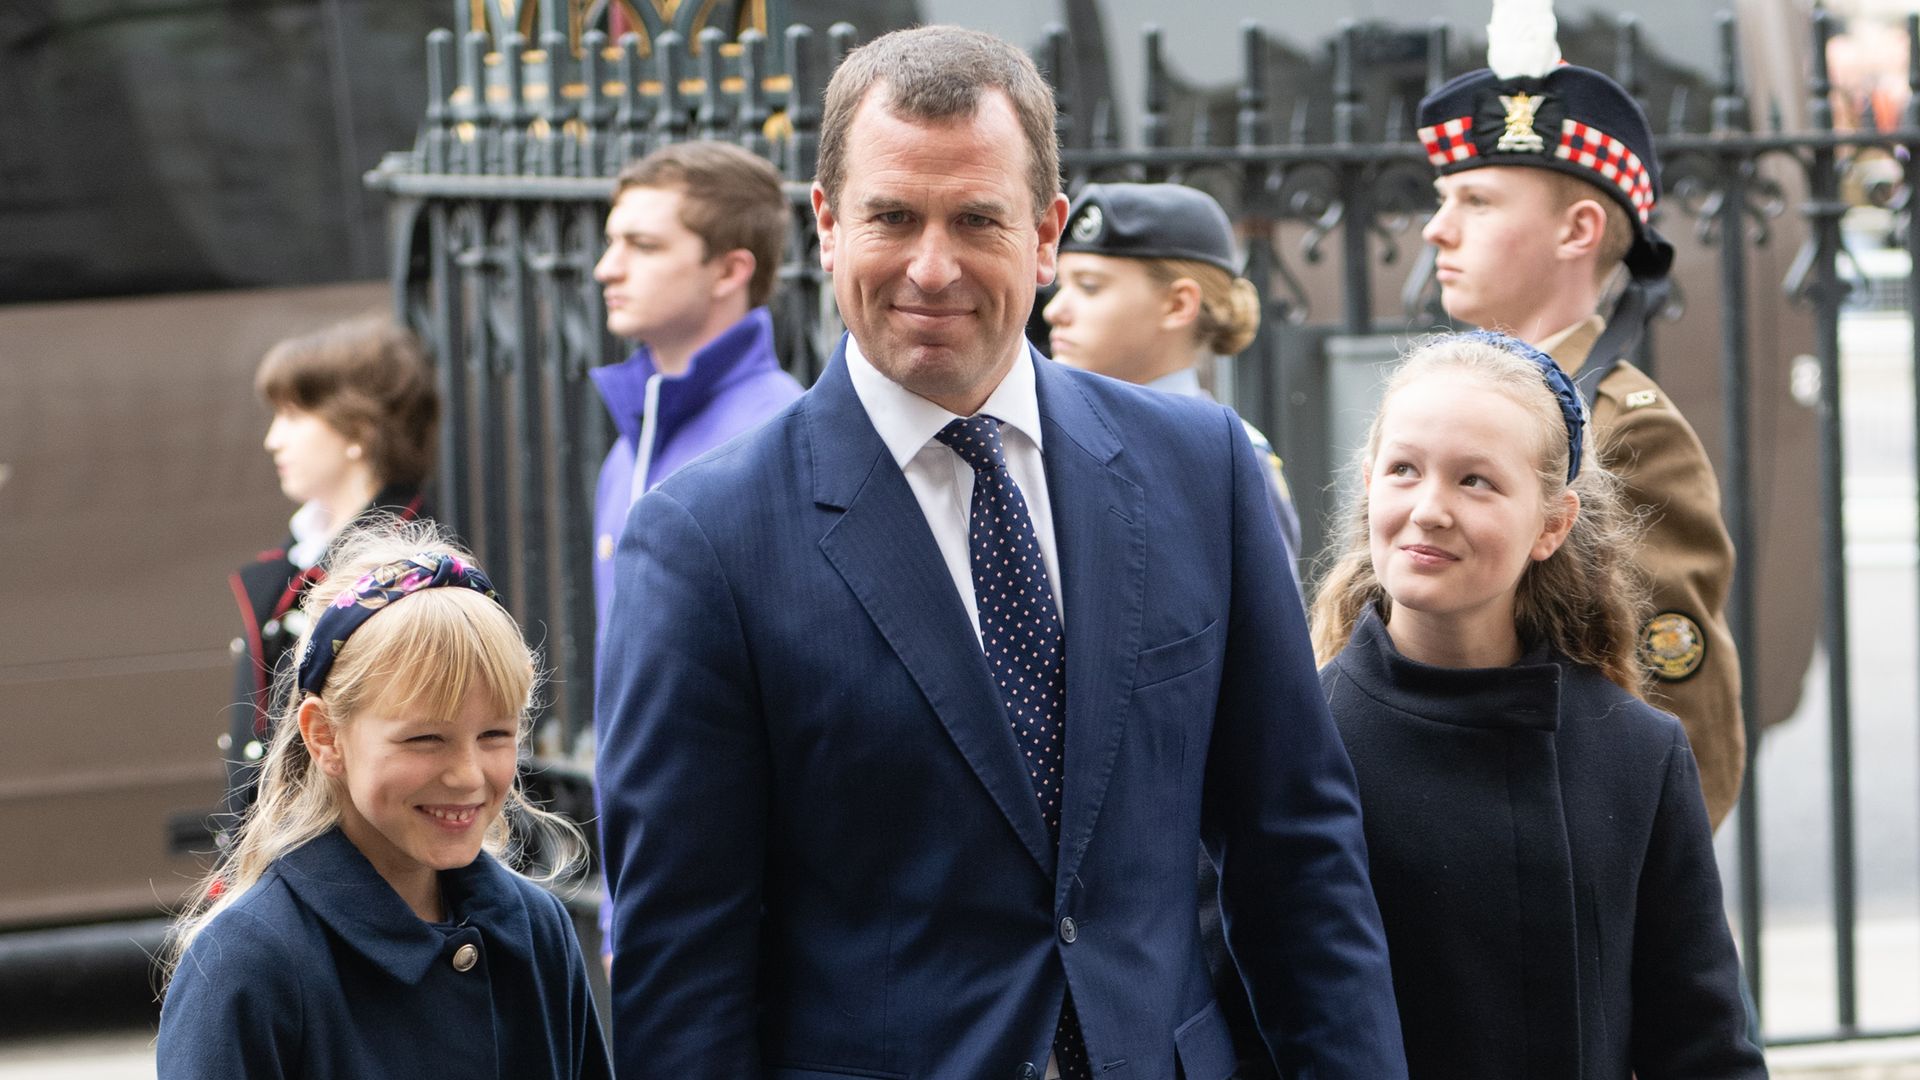 15 of Peter Phillips' best moments with his daughters and royal relatives